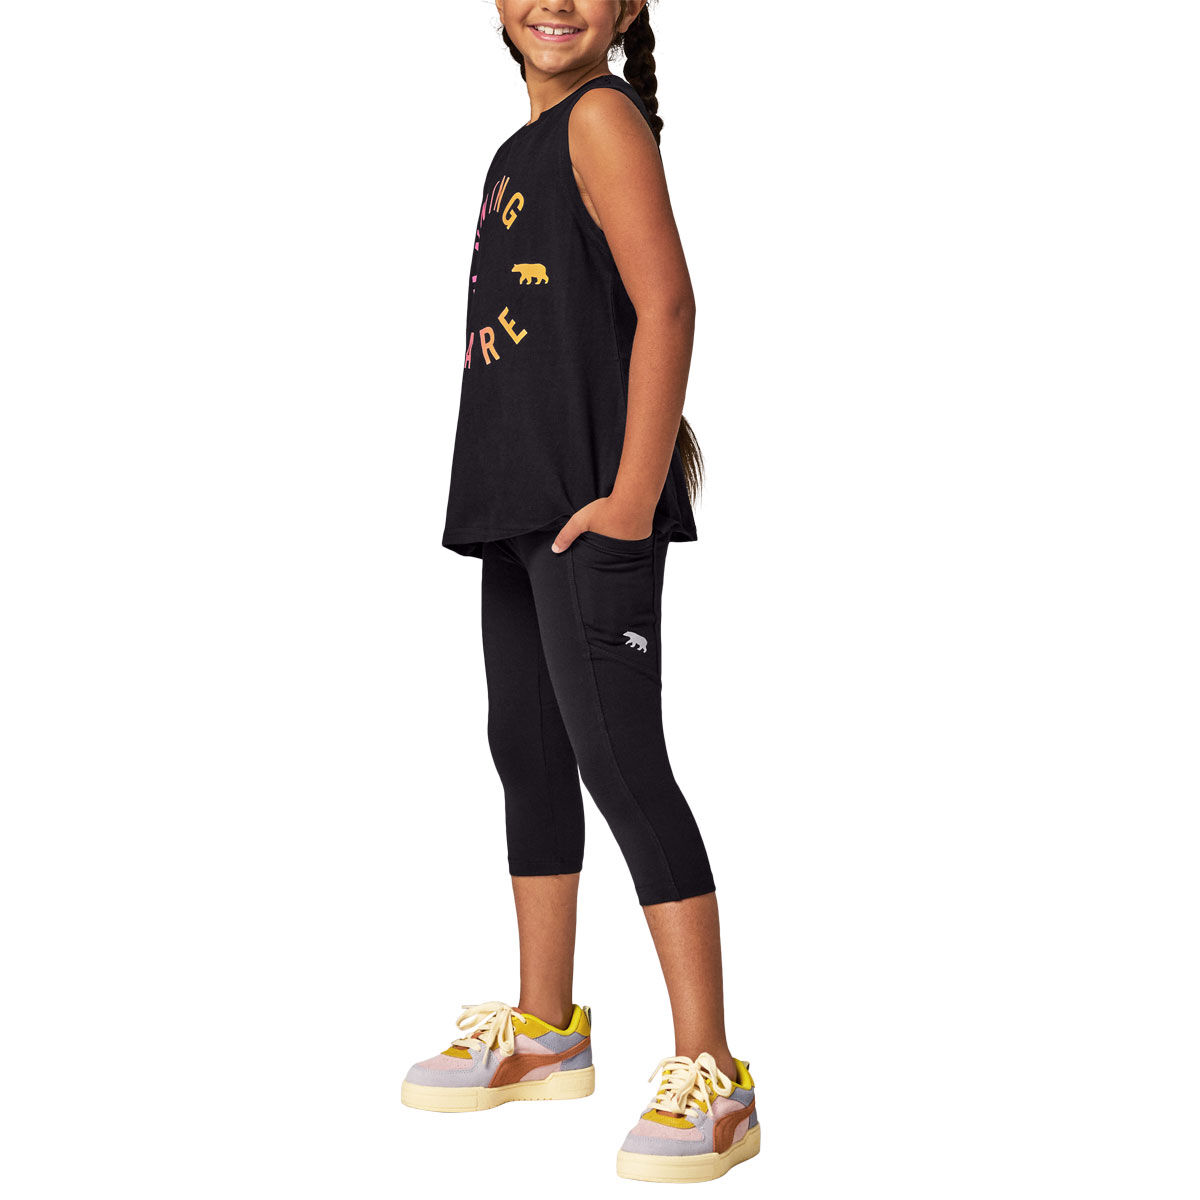 Running Bare Girls Activewear and Exercise Tights. - All Star 3/4 Leggings  - Girls